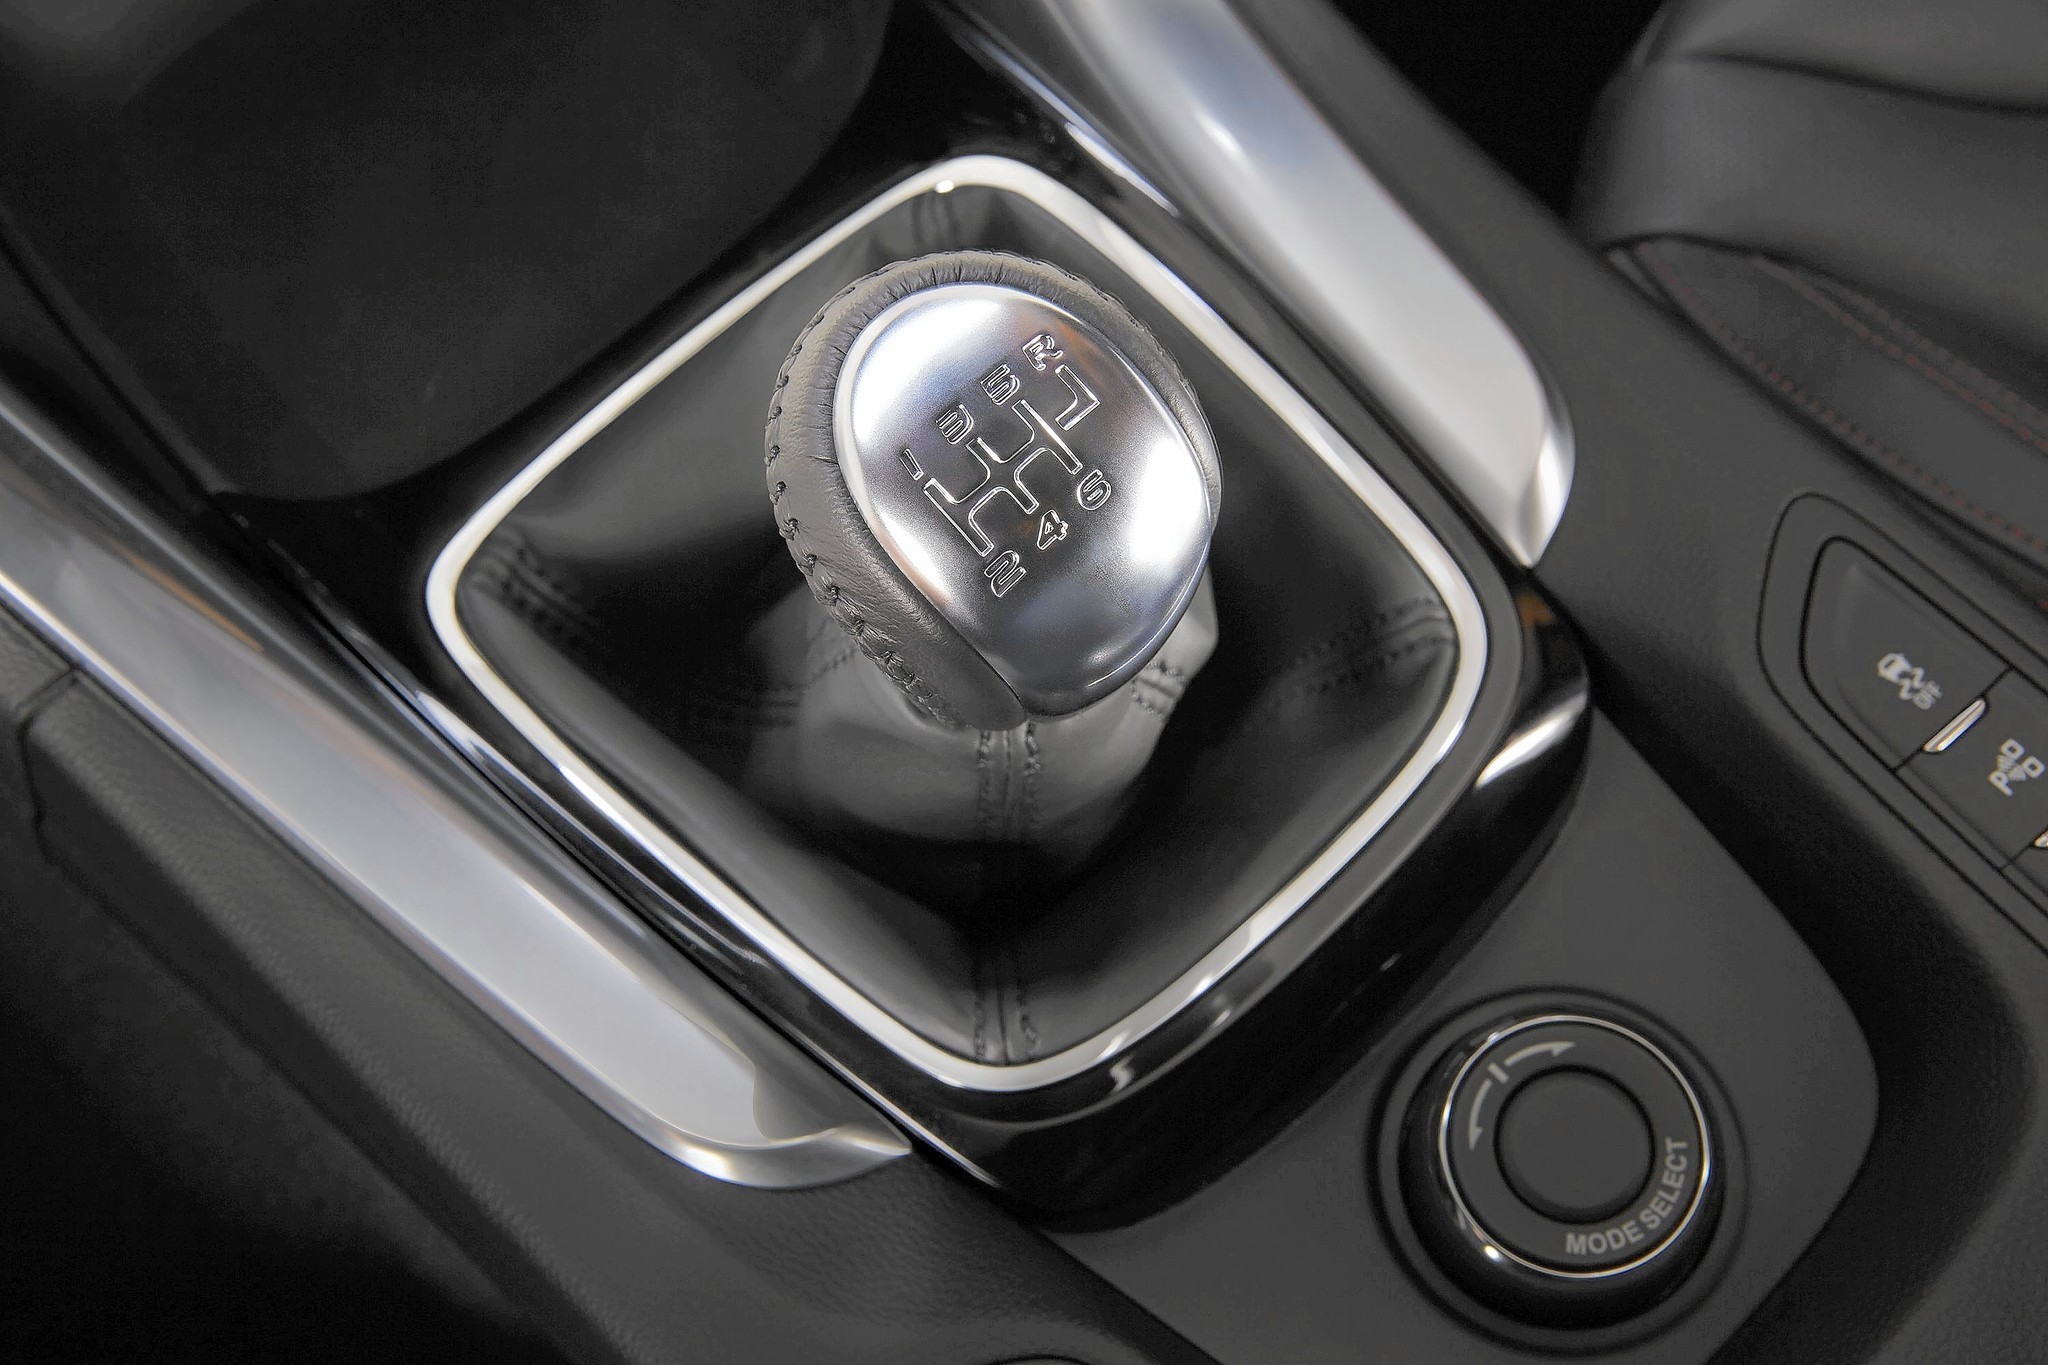 New cars shift away from manual transmissions - Chicago Tribune